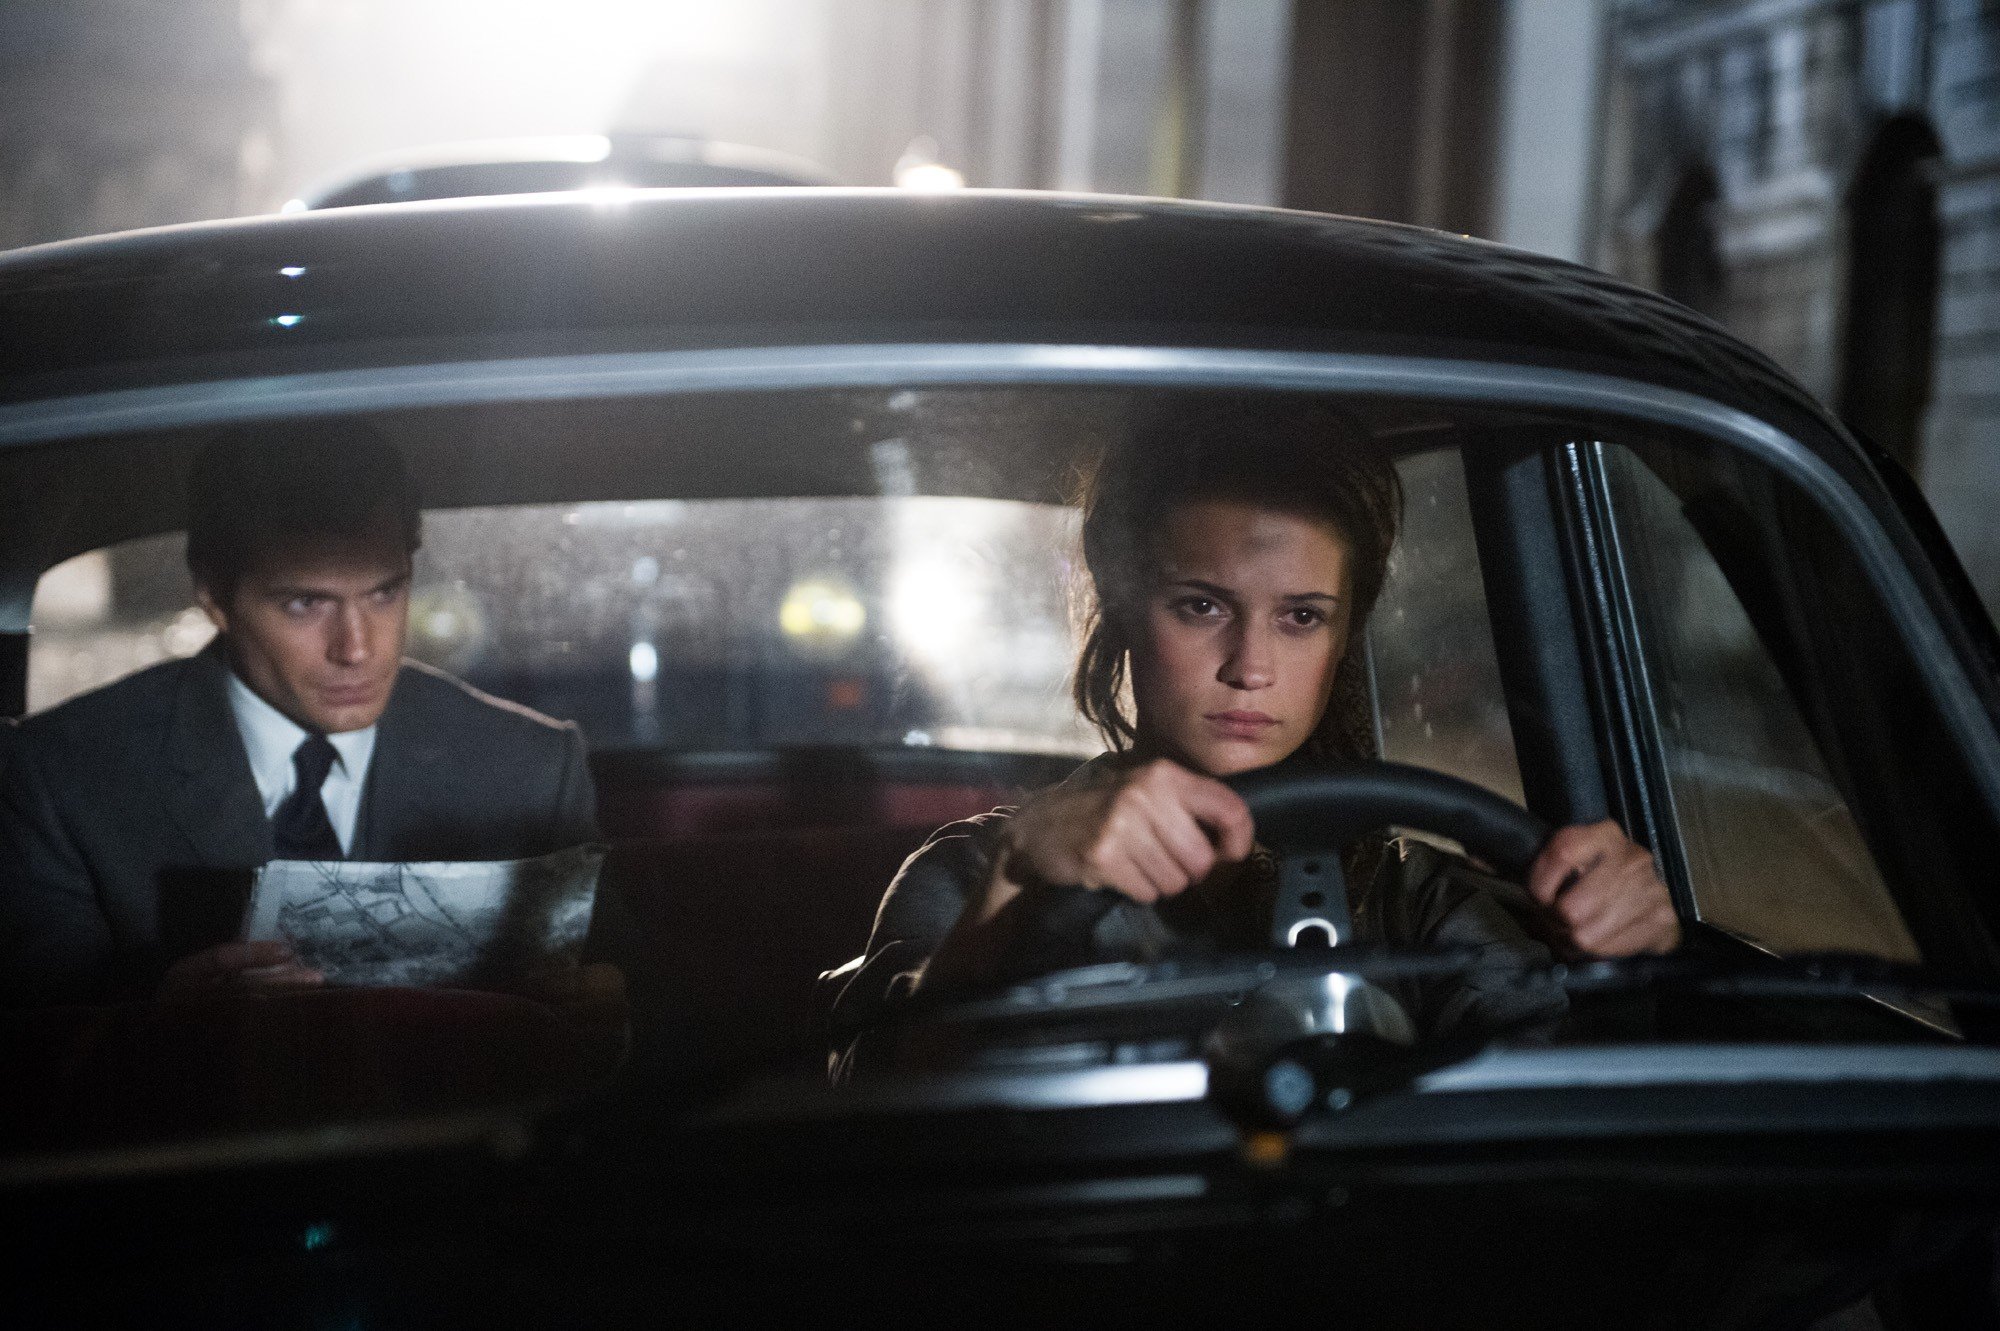 Henry Cavill and Alicia Vikander star in The Man from U.N.C.L.E.